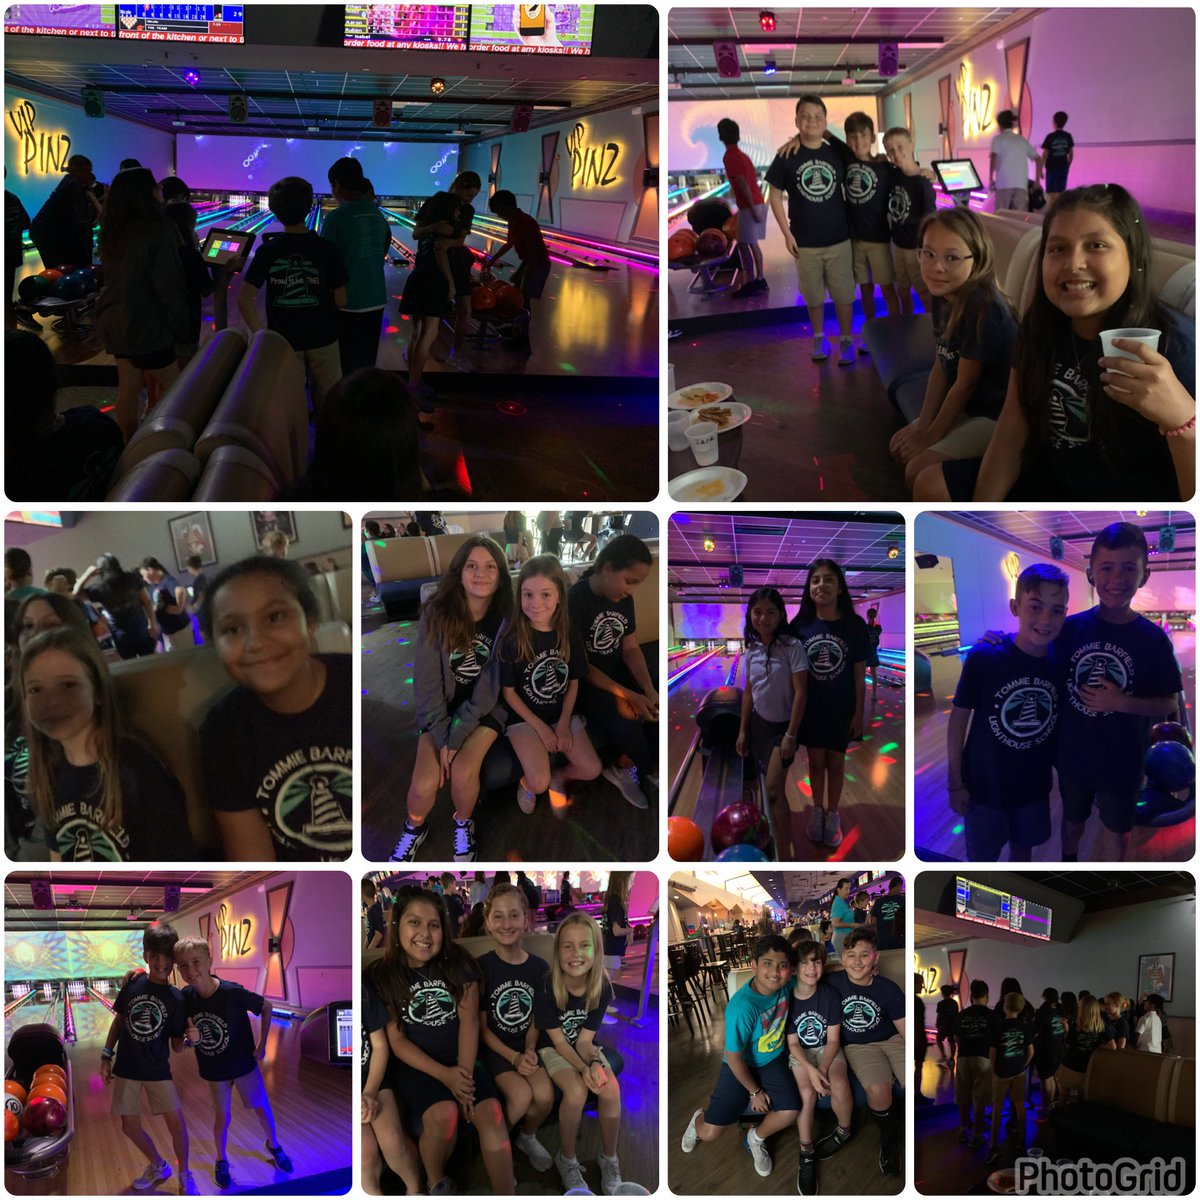 The fifth-grade class had an amazing time at #HeadPinzBowling today! 🎳 What a fantastic way to end our school year together. Thanks to the moms who joined us today! @TommieBarfield #EndOfYear #FieldTripFun